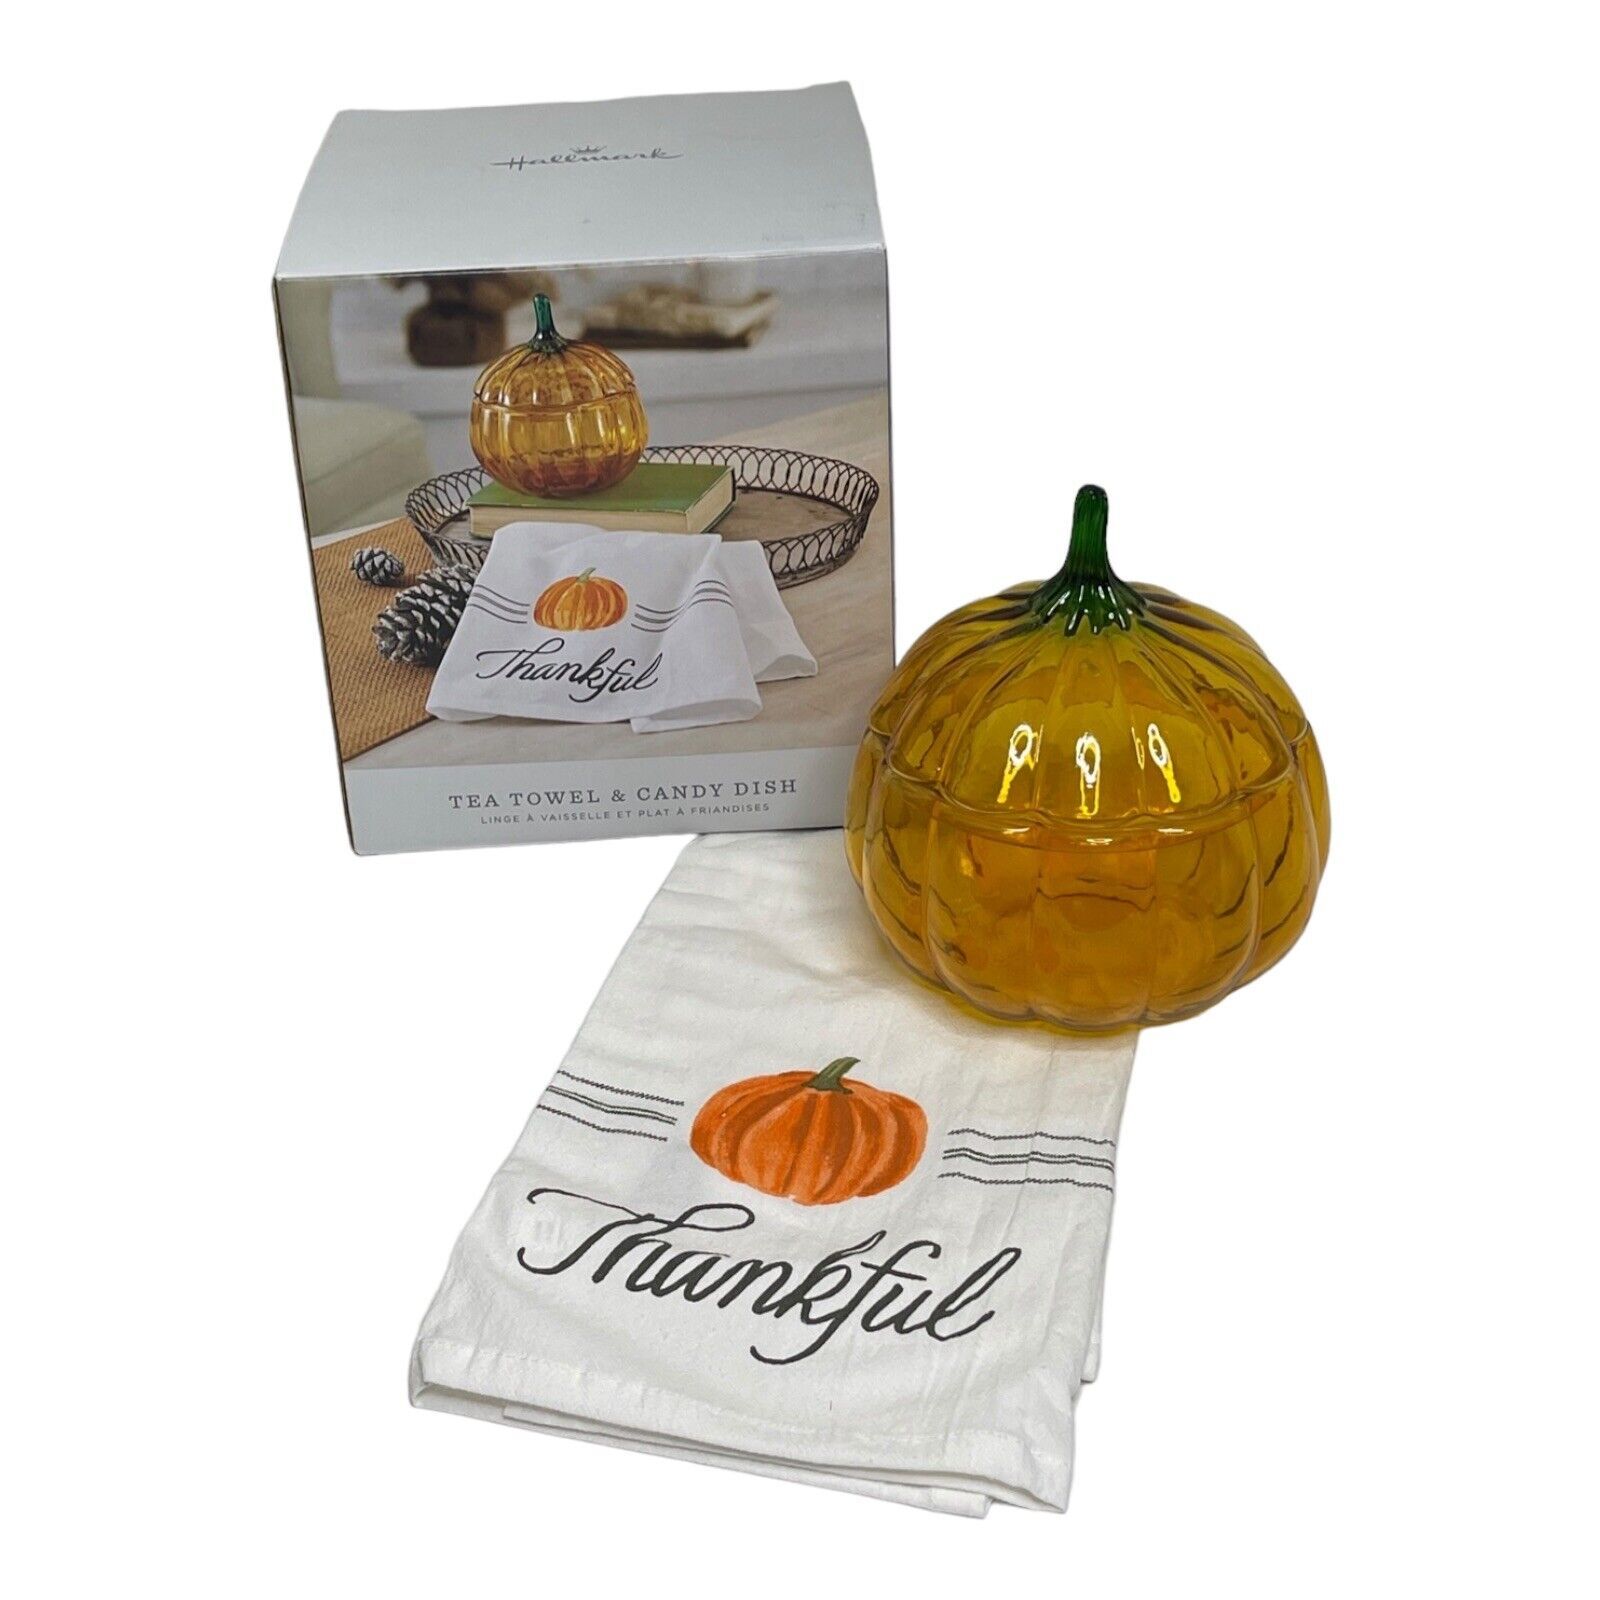 Primary image for Hallmark Pumpkin Glass Candy Dish Bowl W/ Lid Thankful Towel harvest Fall Autumn